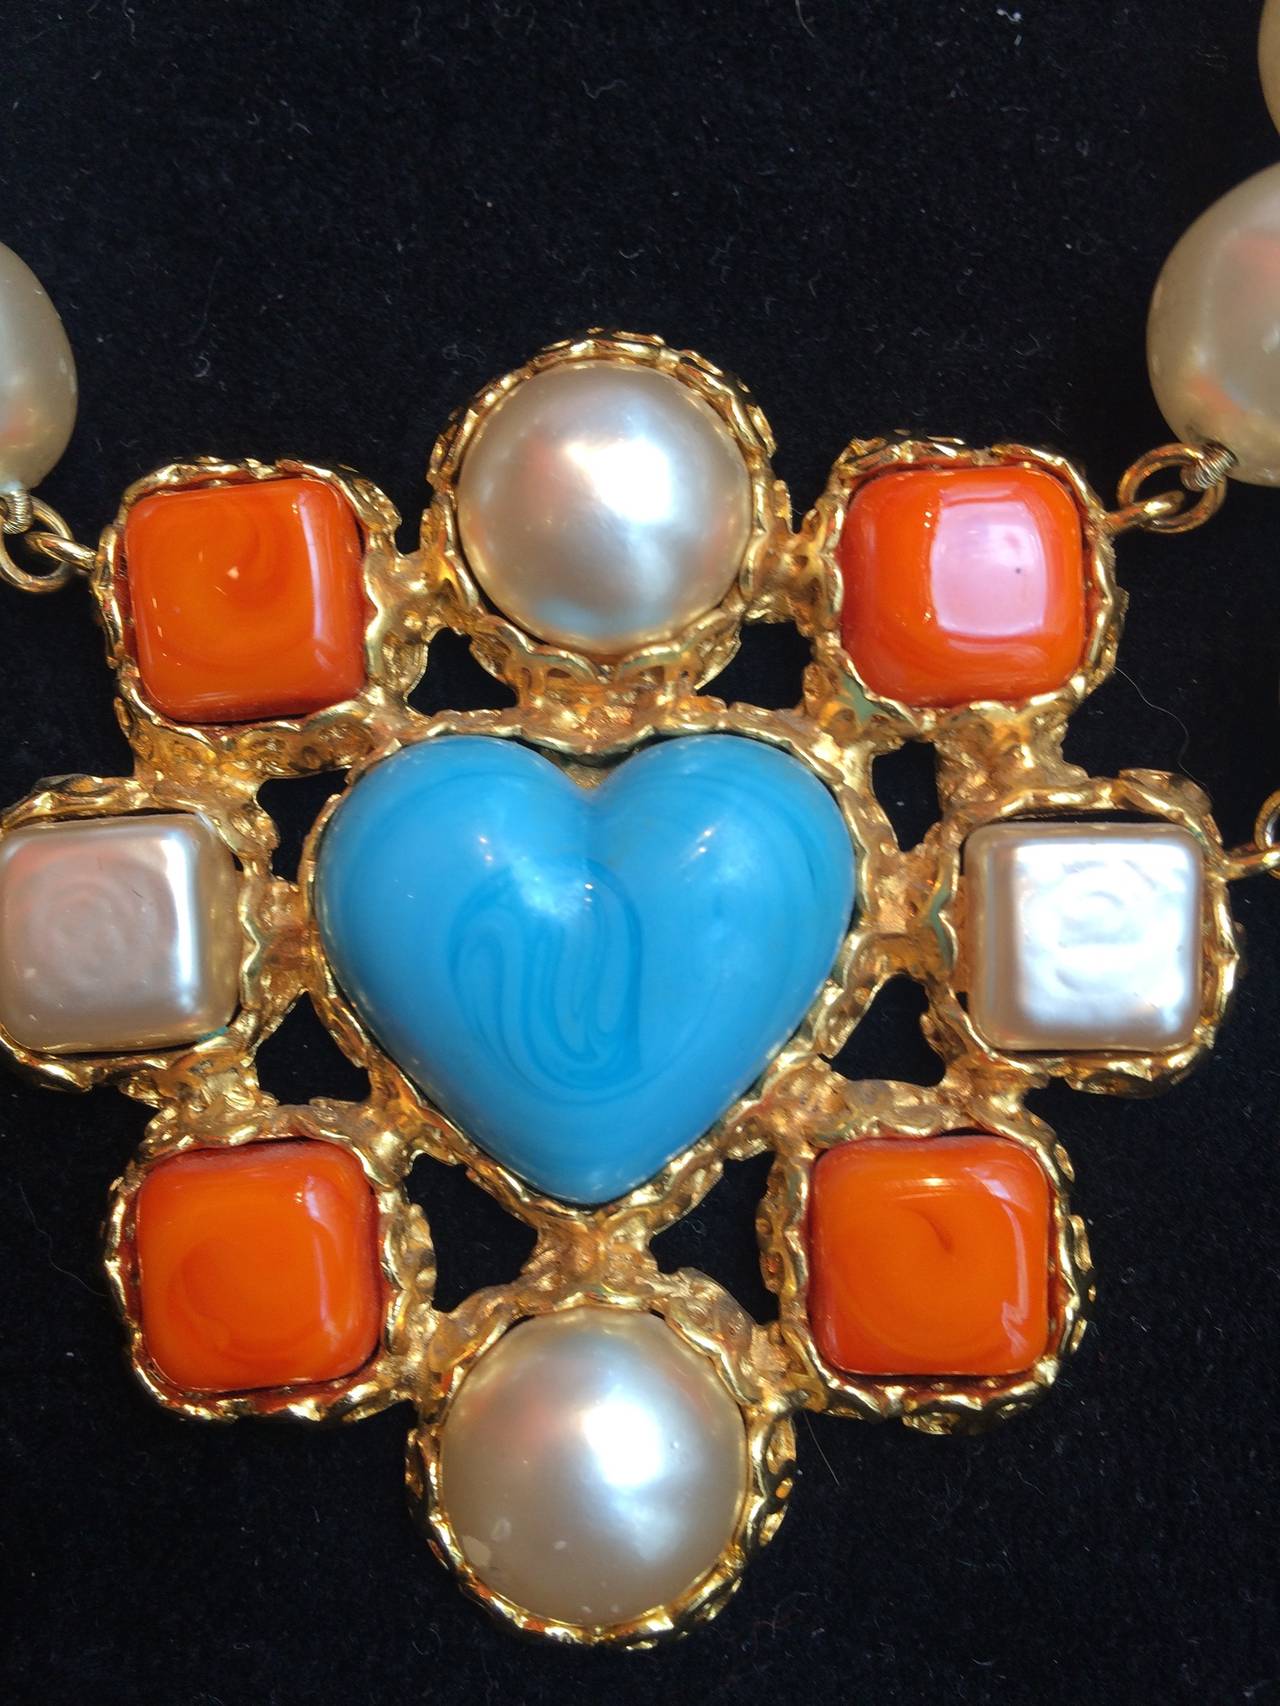 Amazing  2 strand necklace with a heart in turquoise resin in the middle and 4 square orange resin and fake pearls around  .